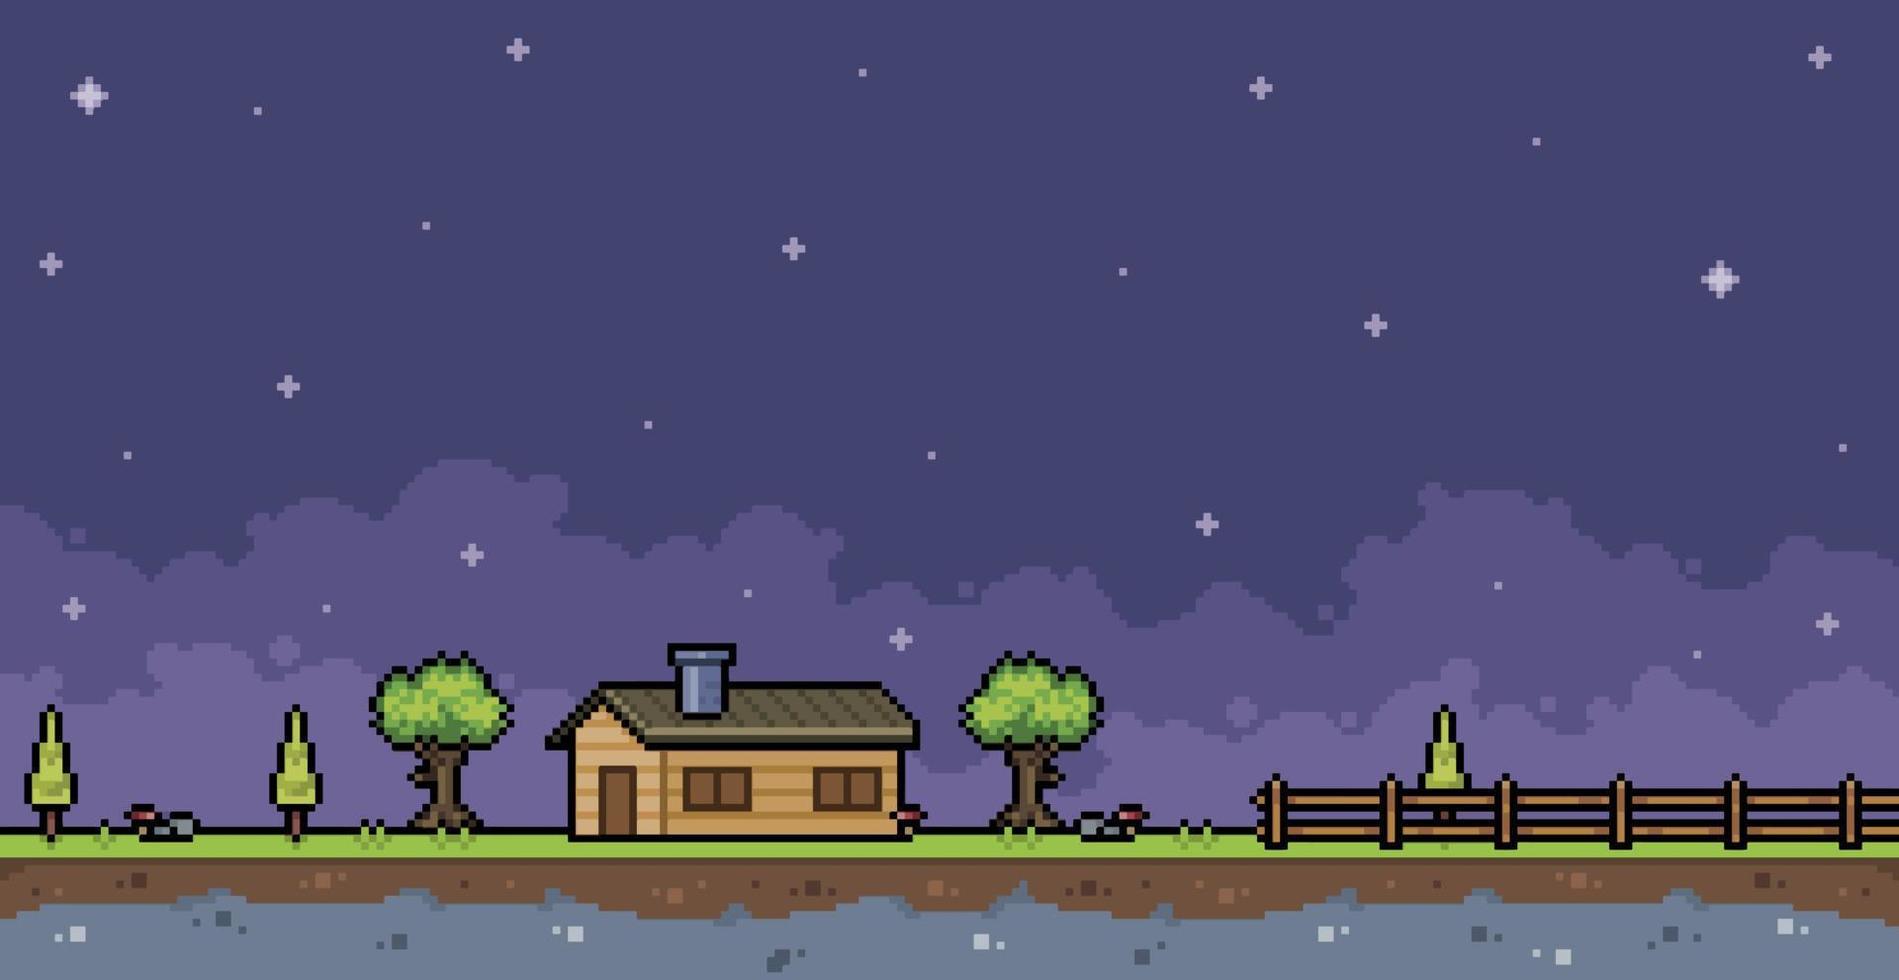 Pixel art farm landscape at night with house, fence and tree 8 bit game background vector